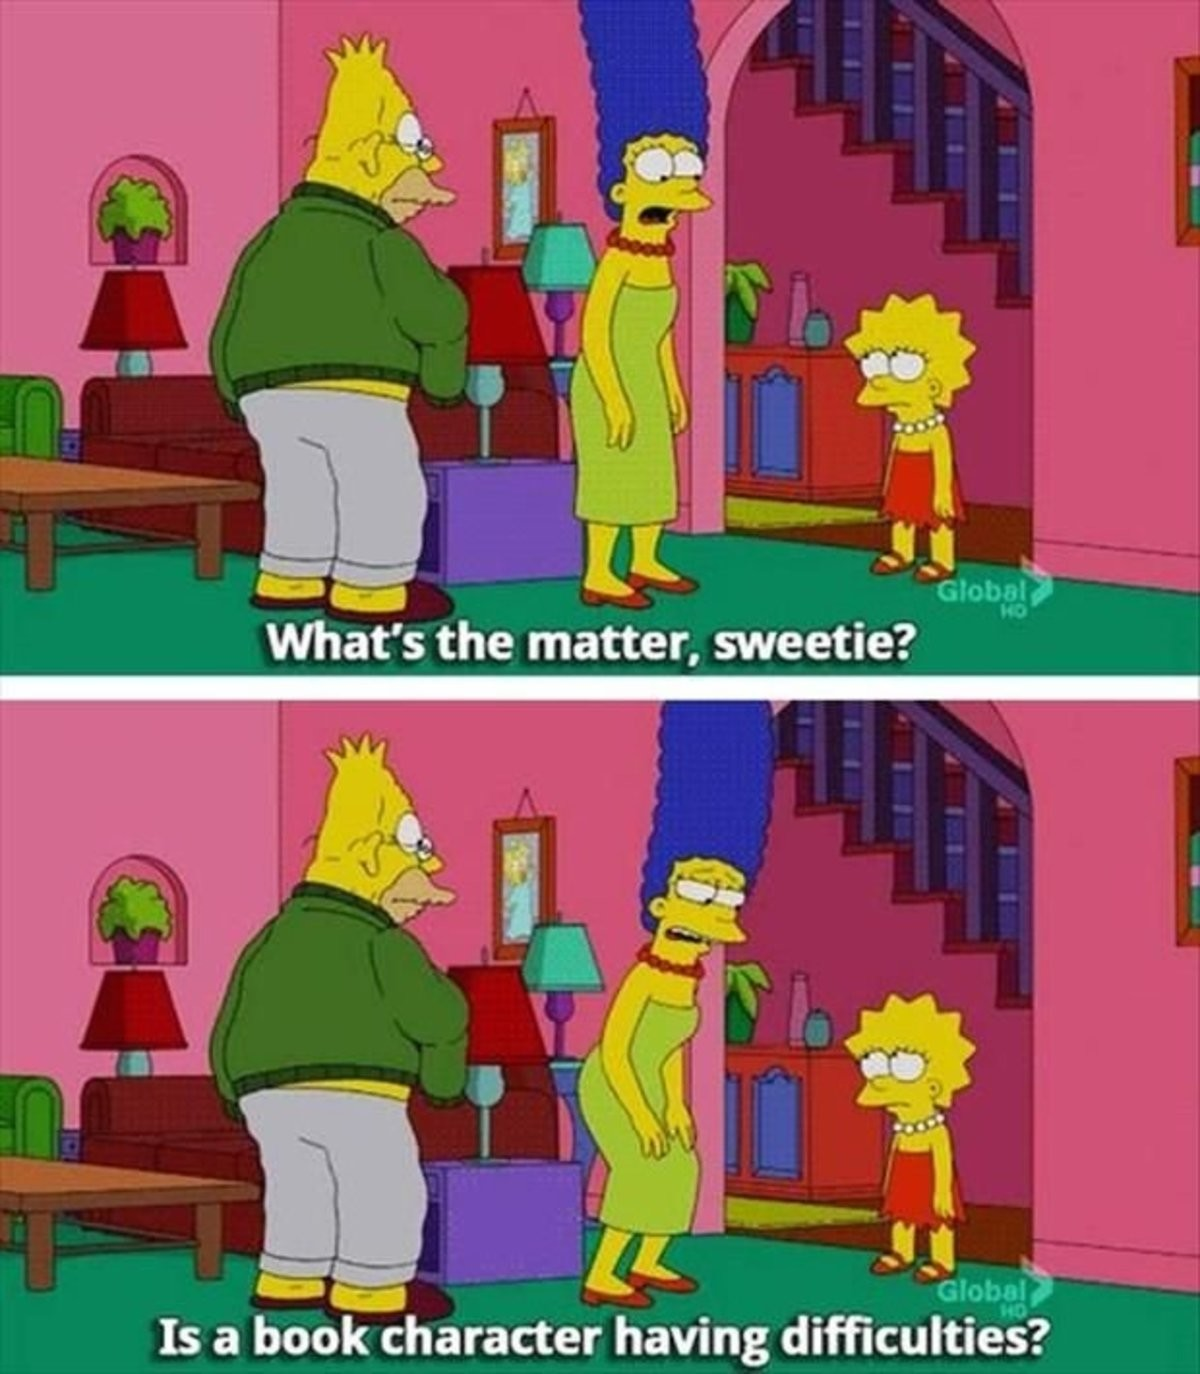 Screenshot from the Simpsons of Marg saying to Lisa "What's the matter sweetie? Is a book character having difficulties"?
